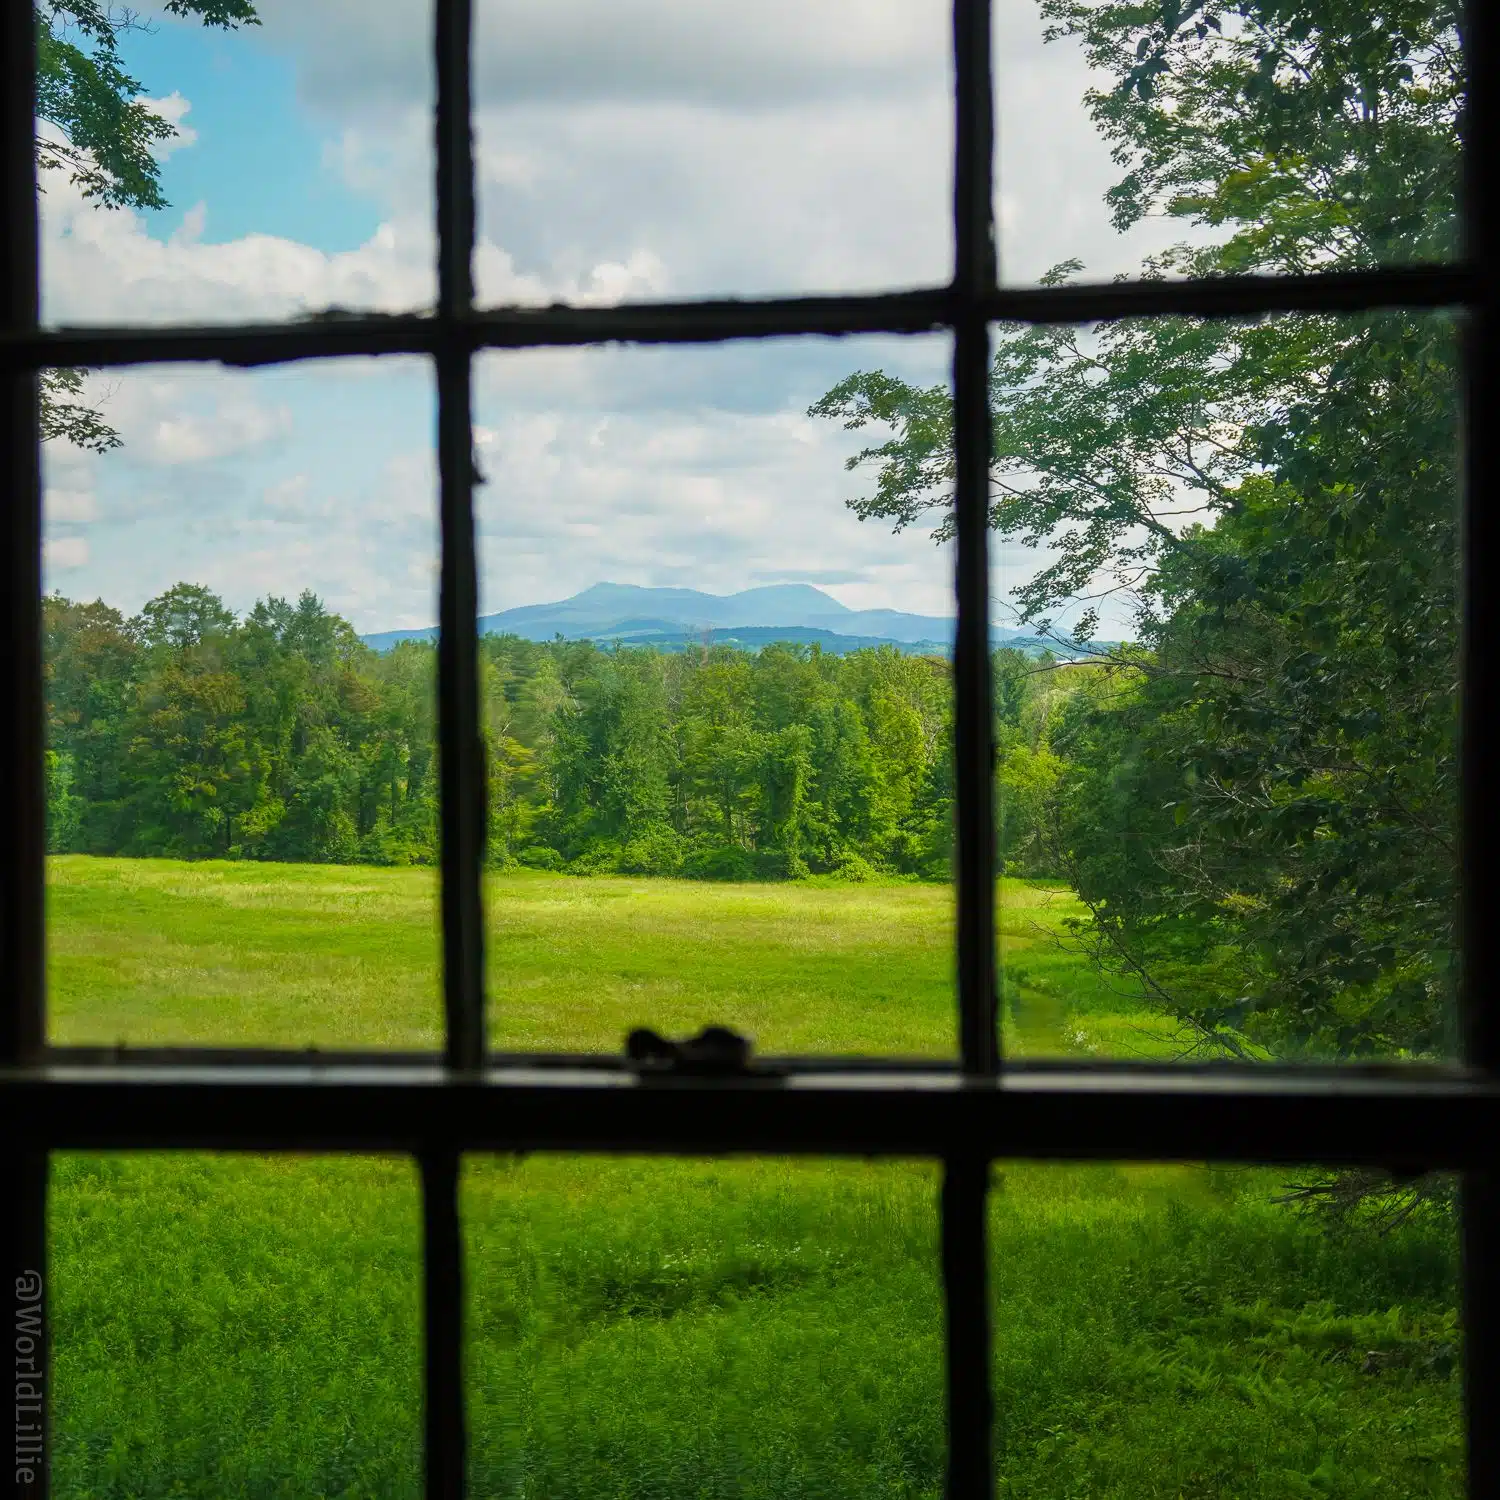 The view of Mount Greylock from Melville's study window!